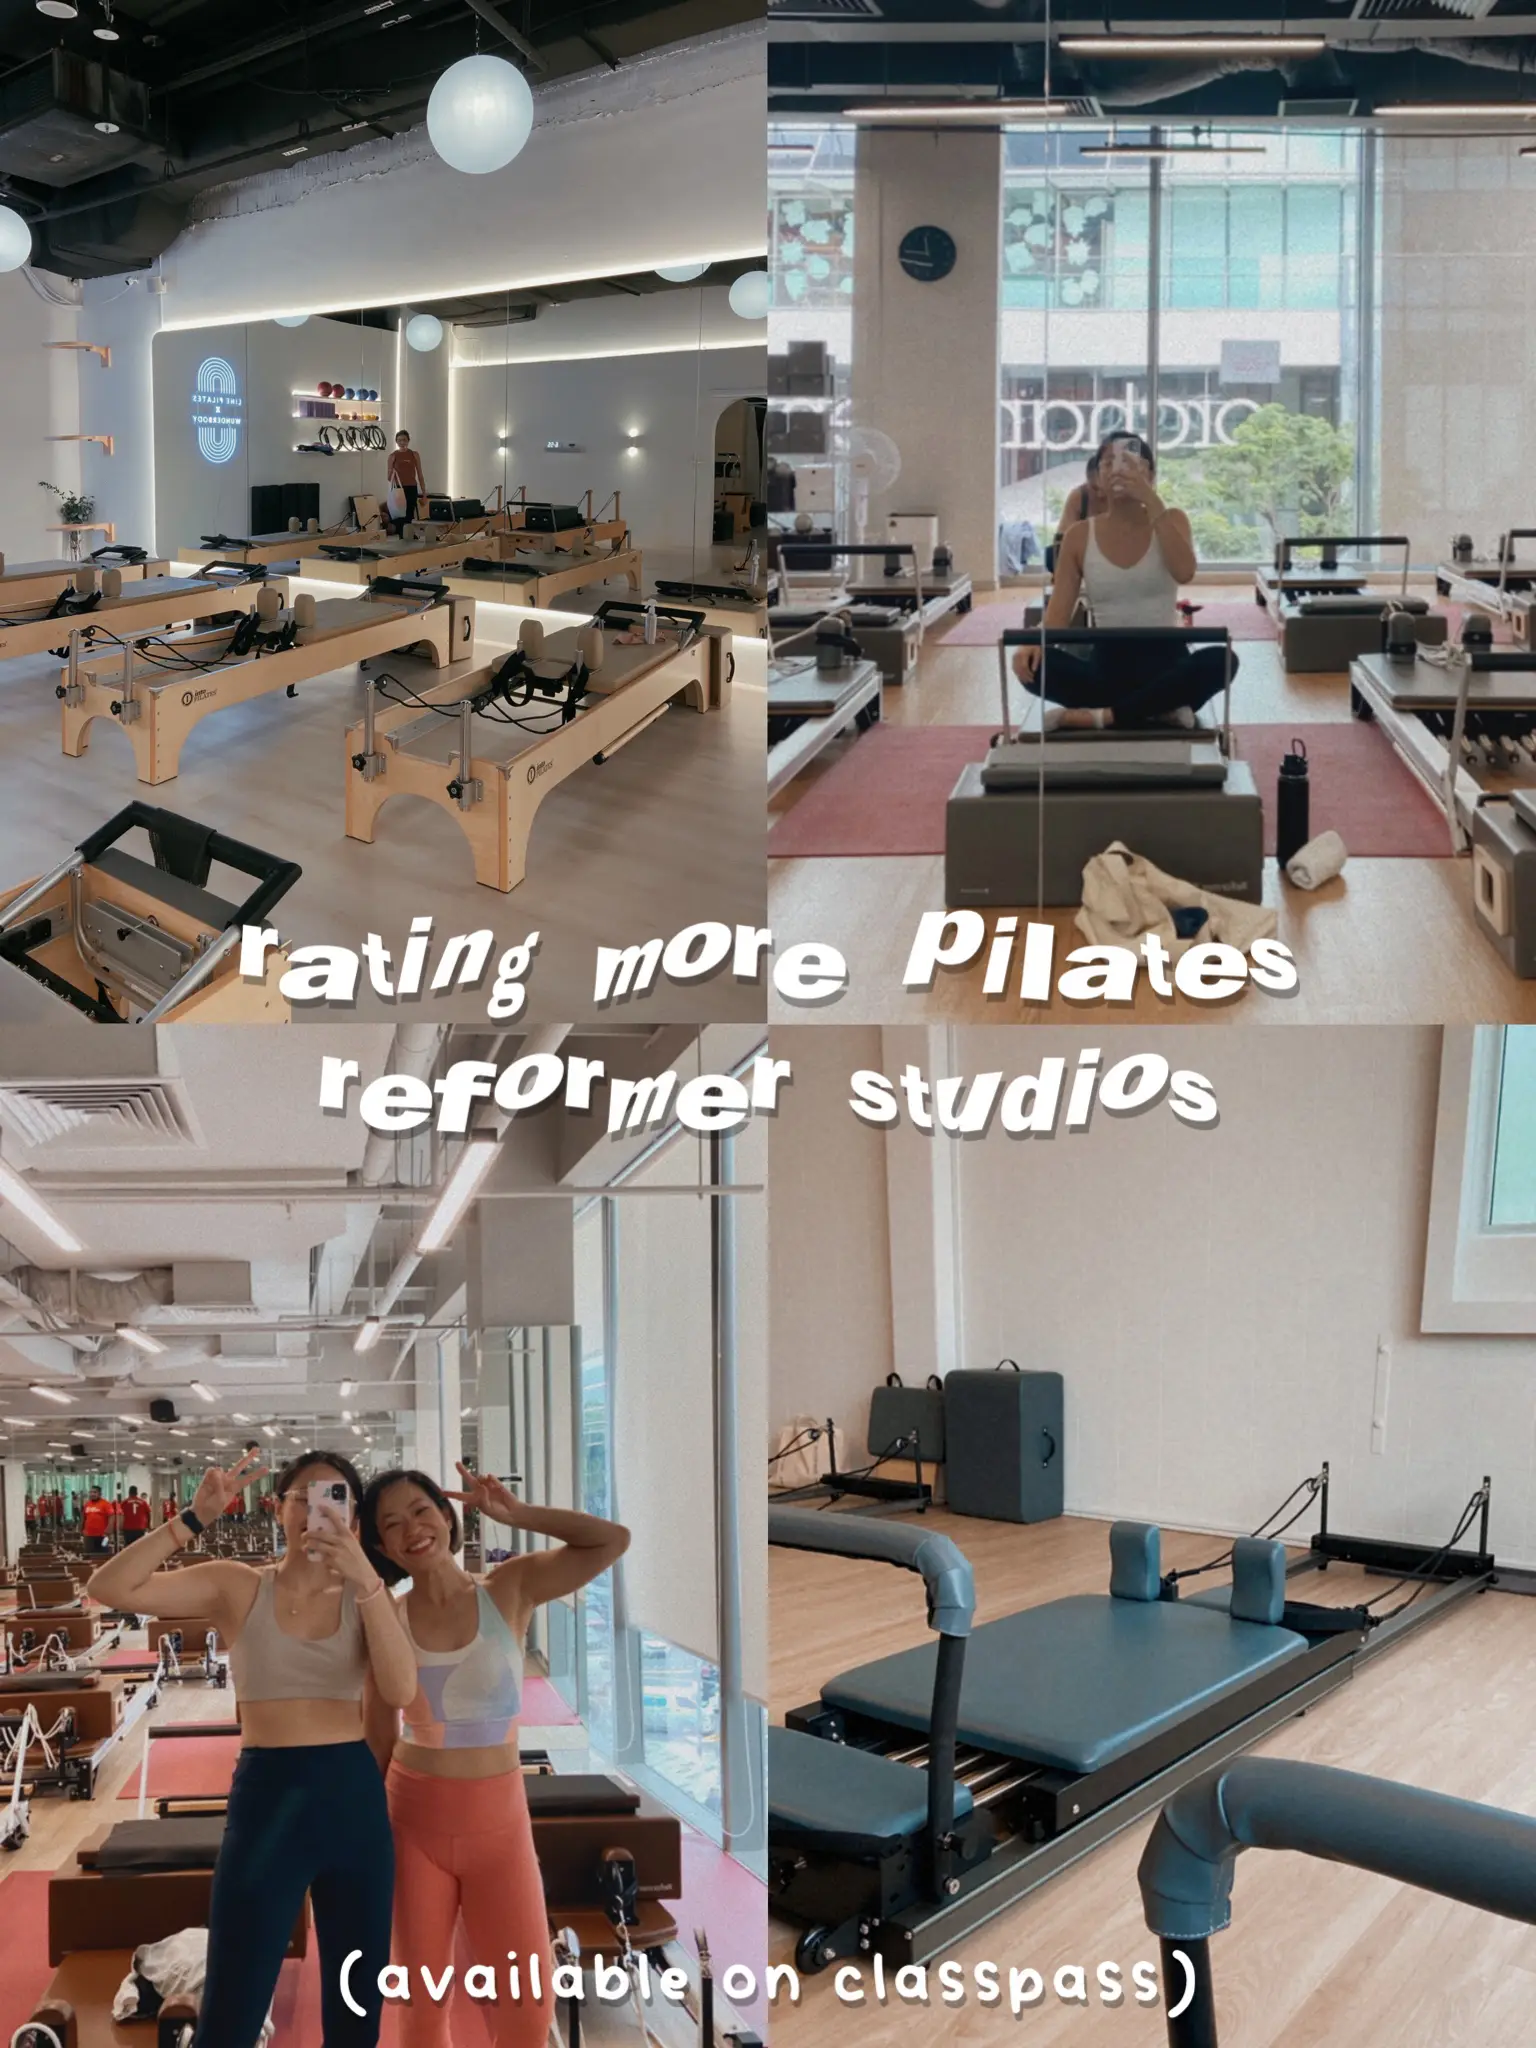 Club Pilates - Introducing the world's first EVER Reformer Towel